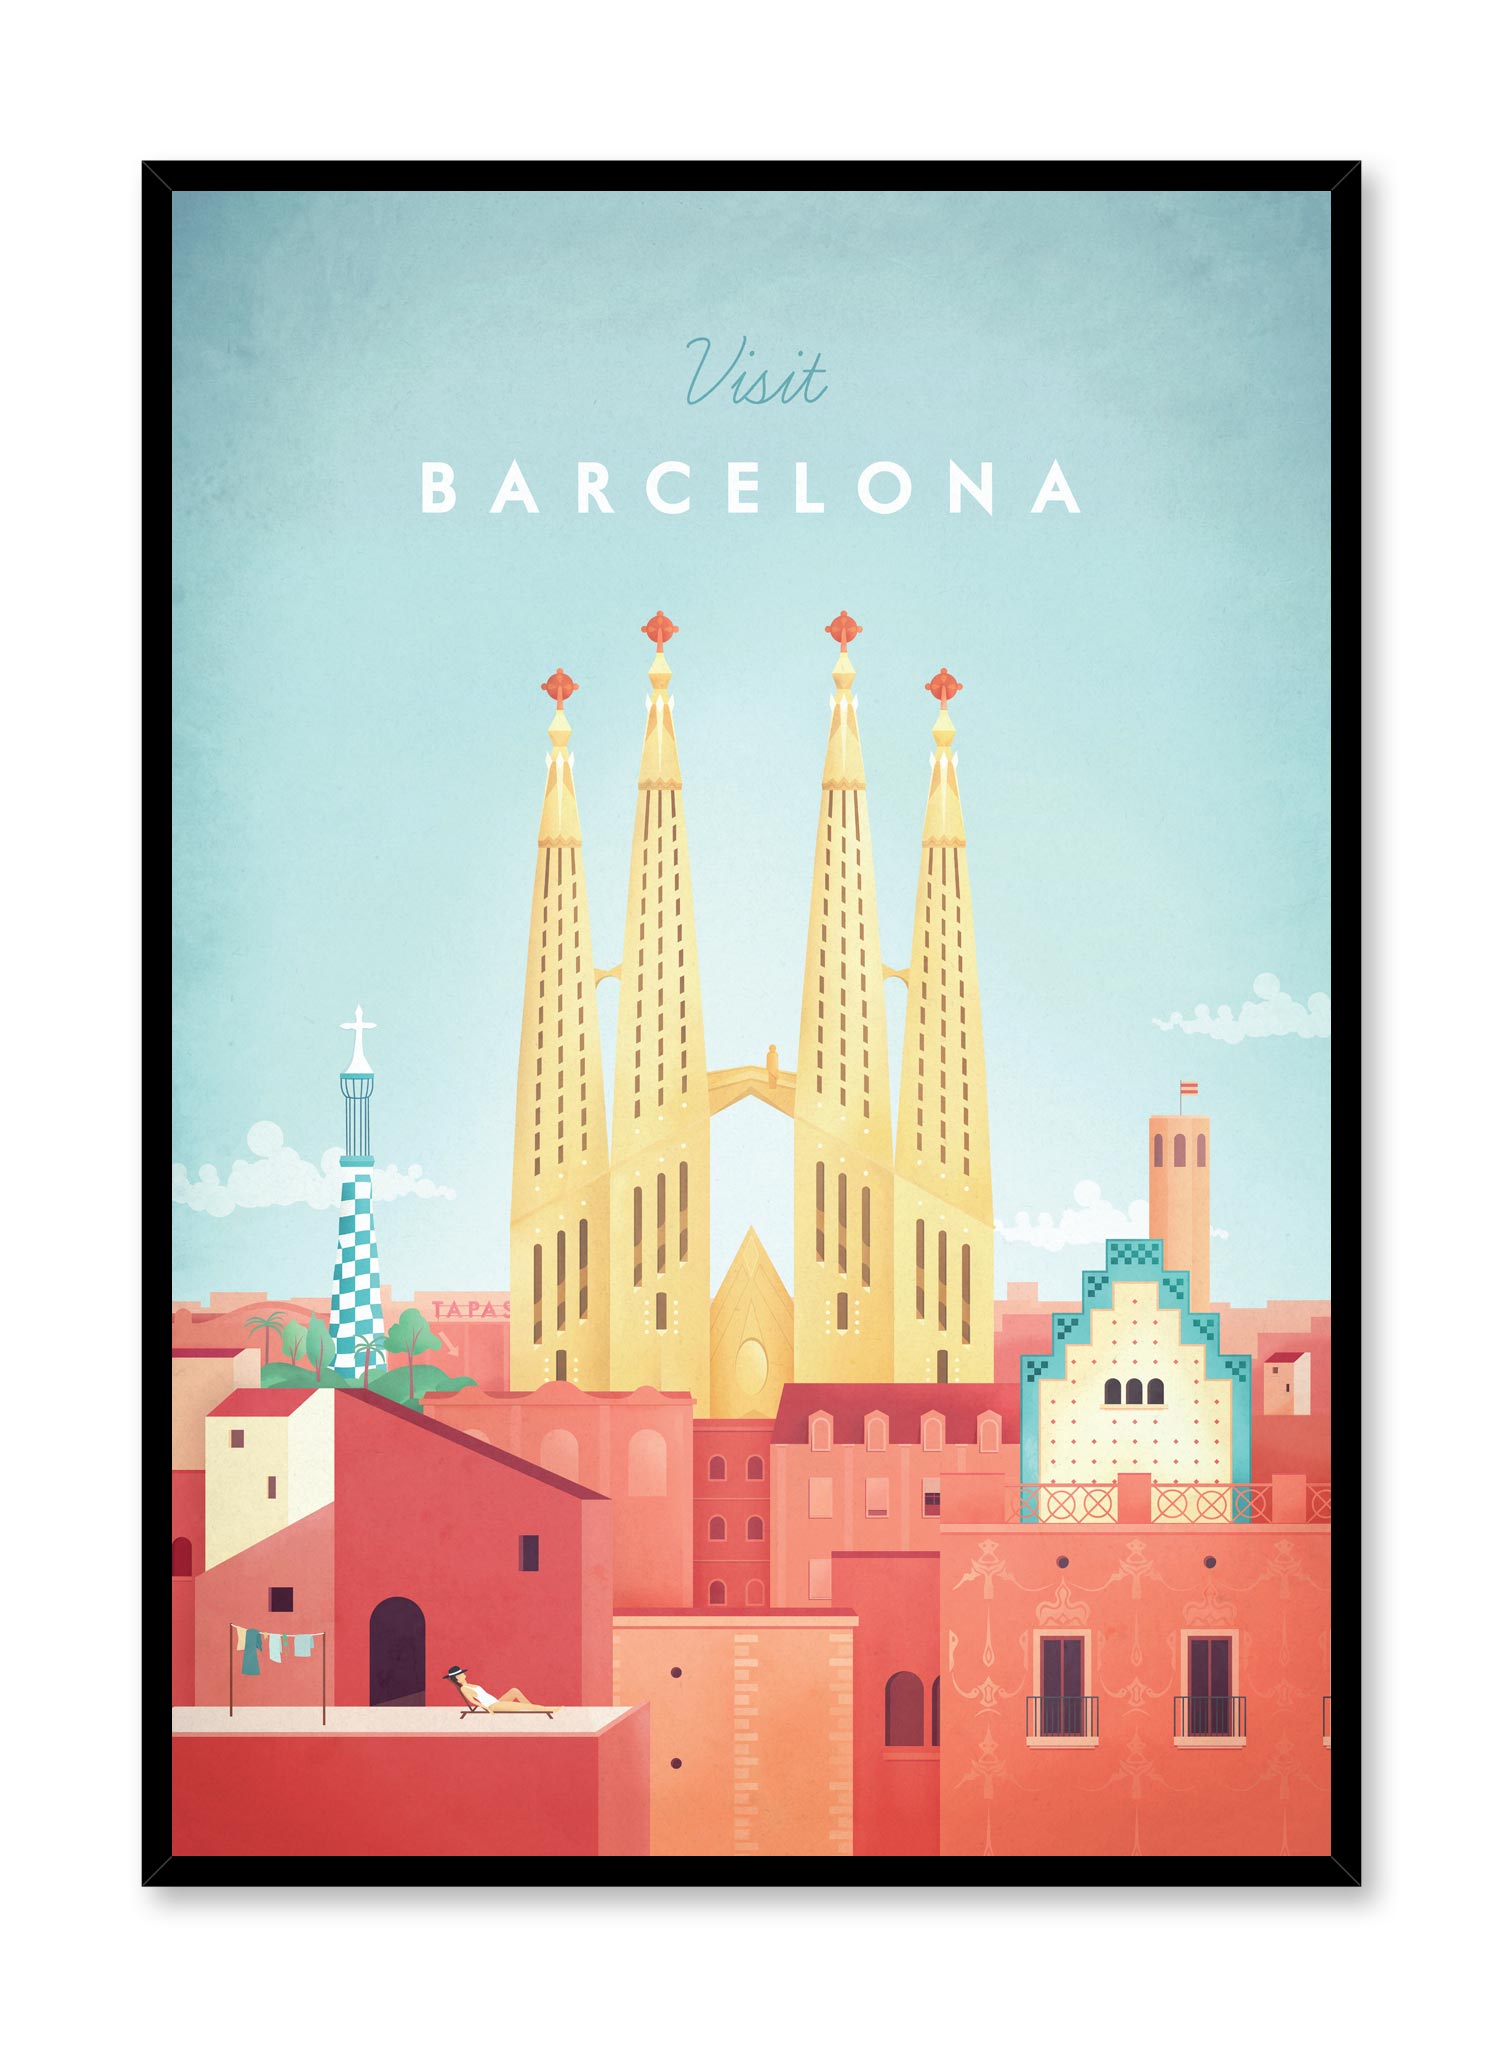 Modern minimalist travel poster by Opposite Wall with illustration of Barcelona, Spain